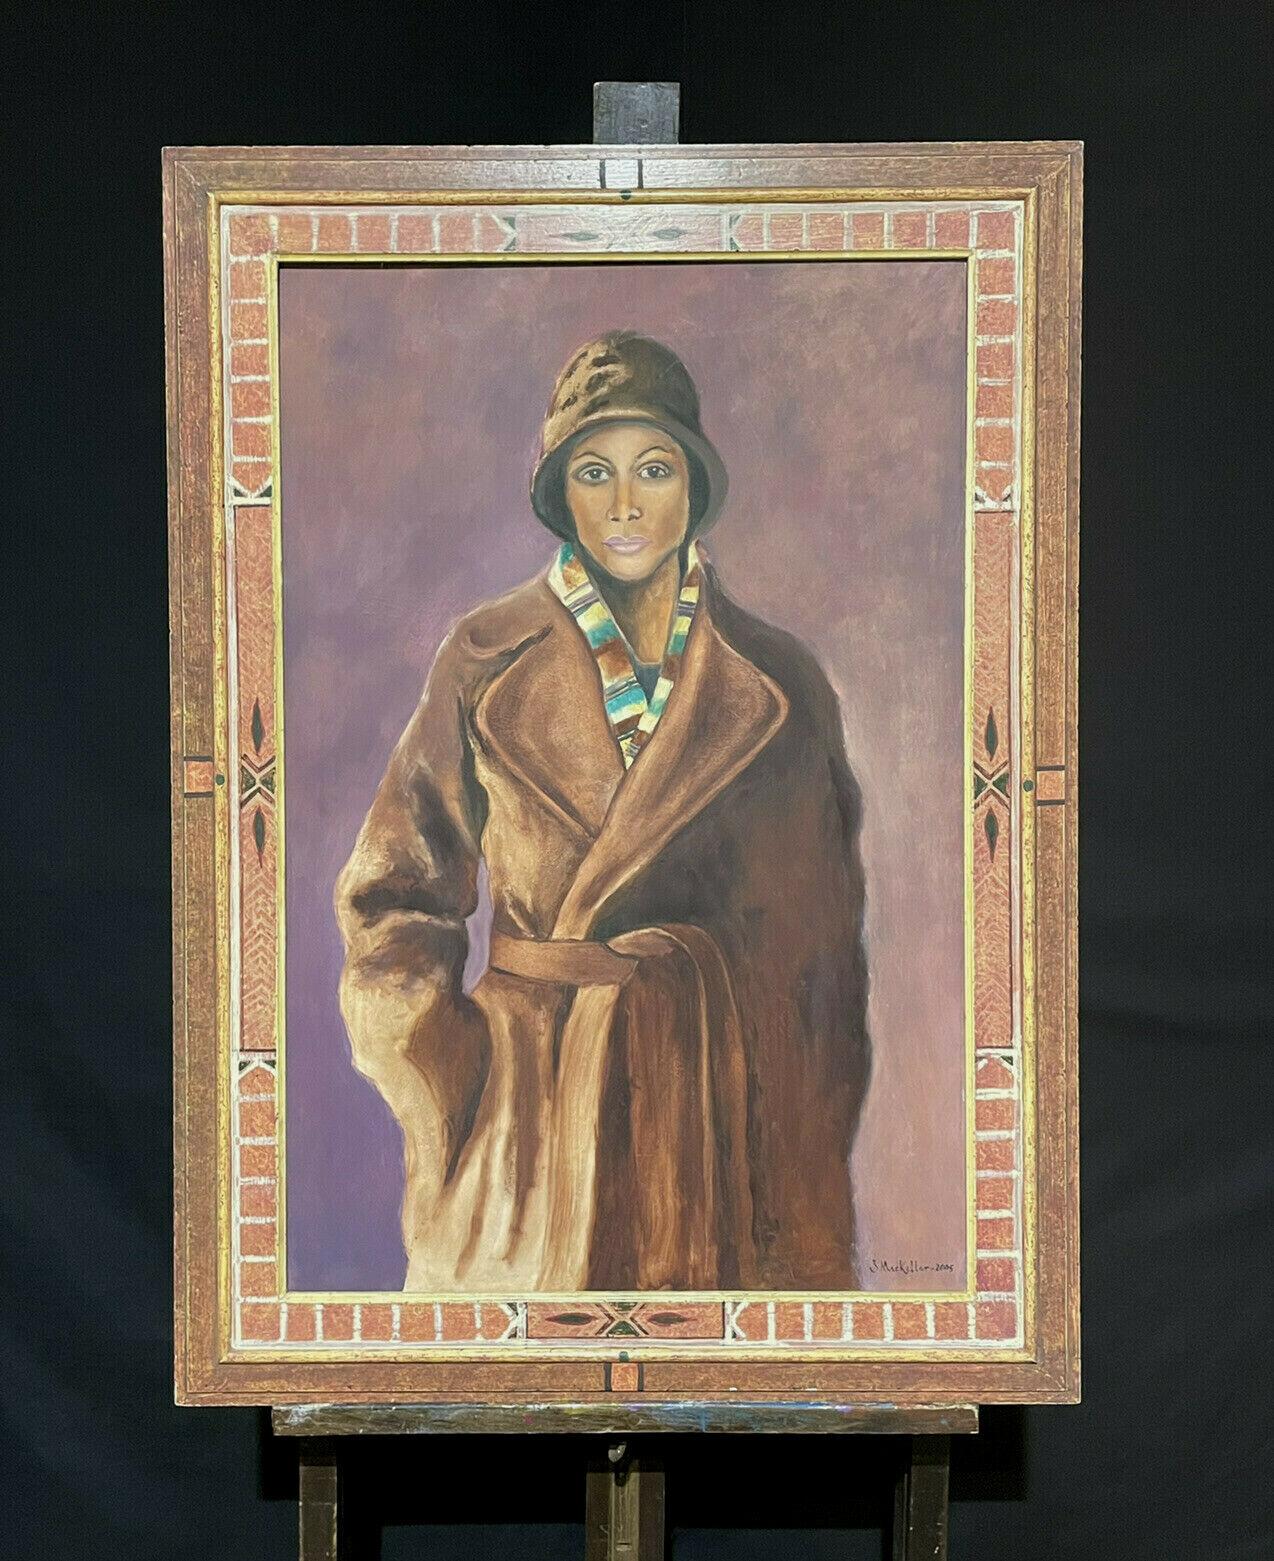 VERY LARGE SIGNED OIL PORTRAIT OF LADY IN VINTAGE COAT & HAT - DATED - FRAMED - Painting by J. Mackeller 